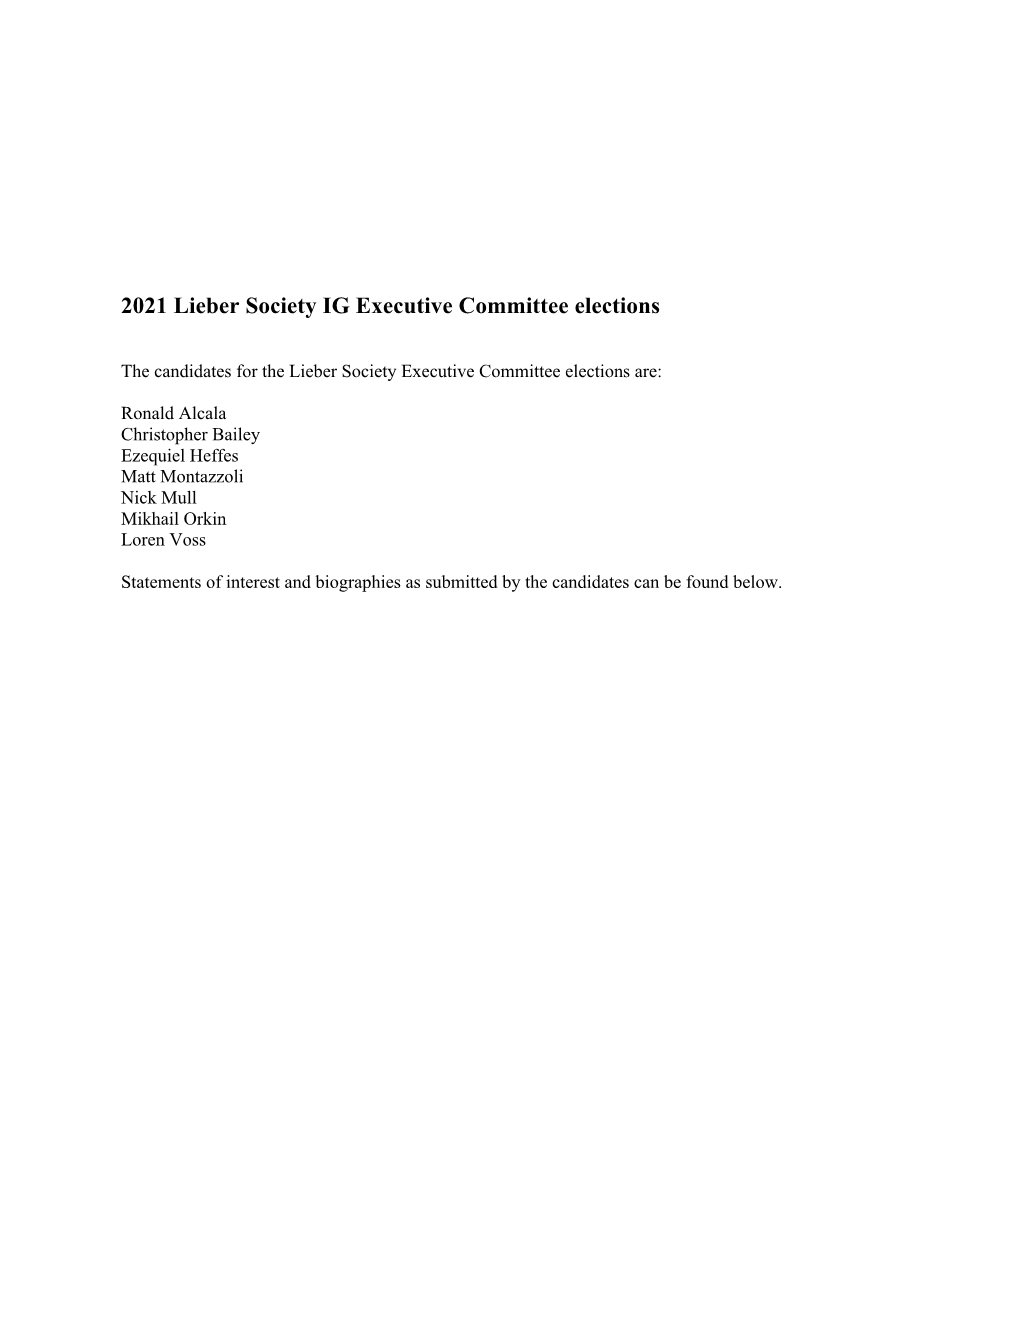 Lieber Society IG Executive Committee Candidate List